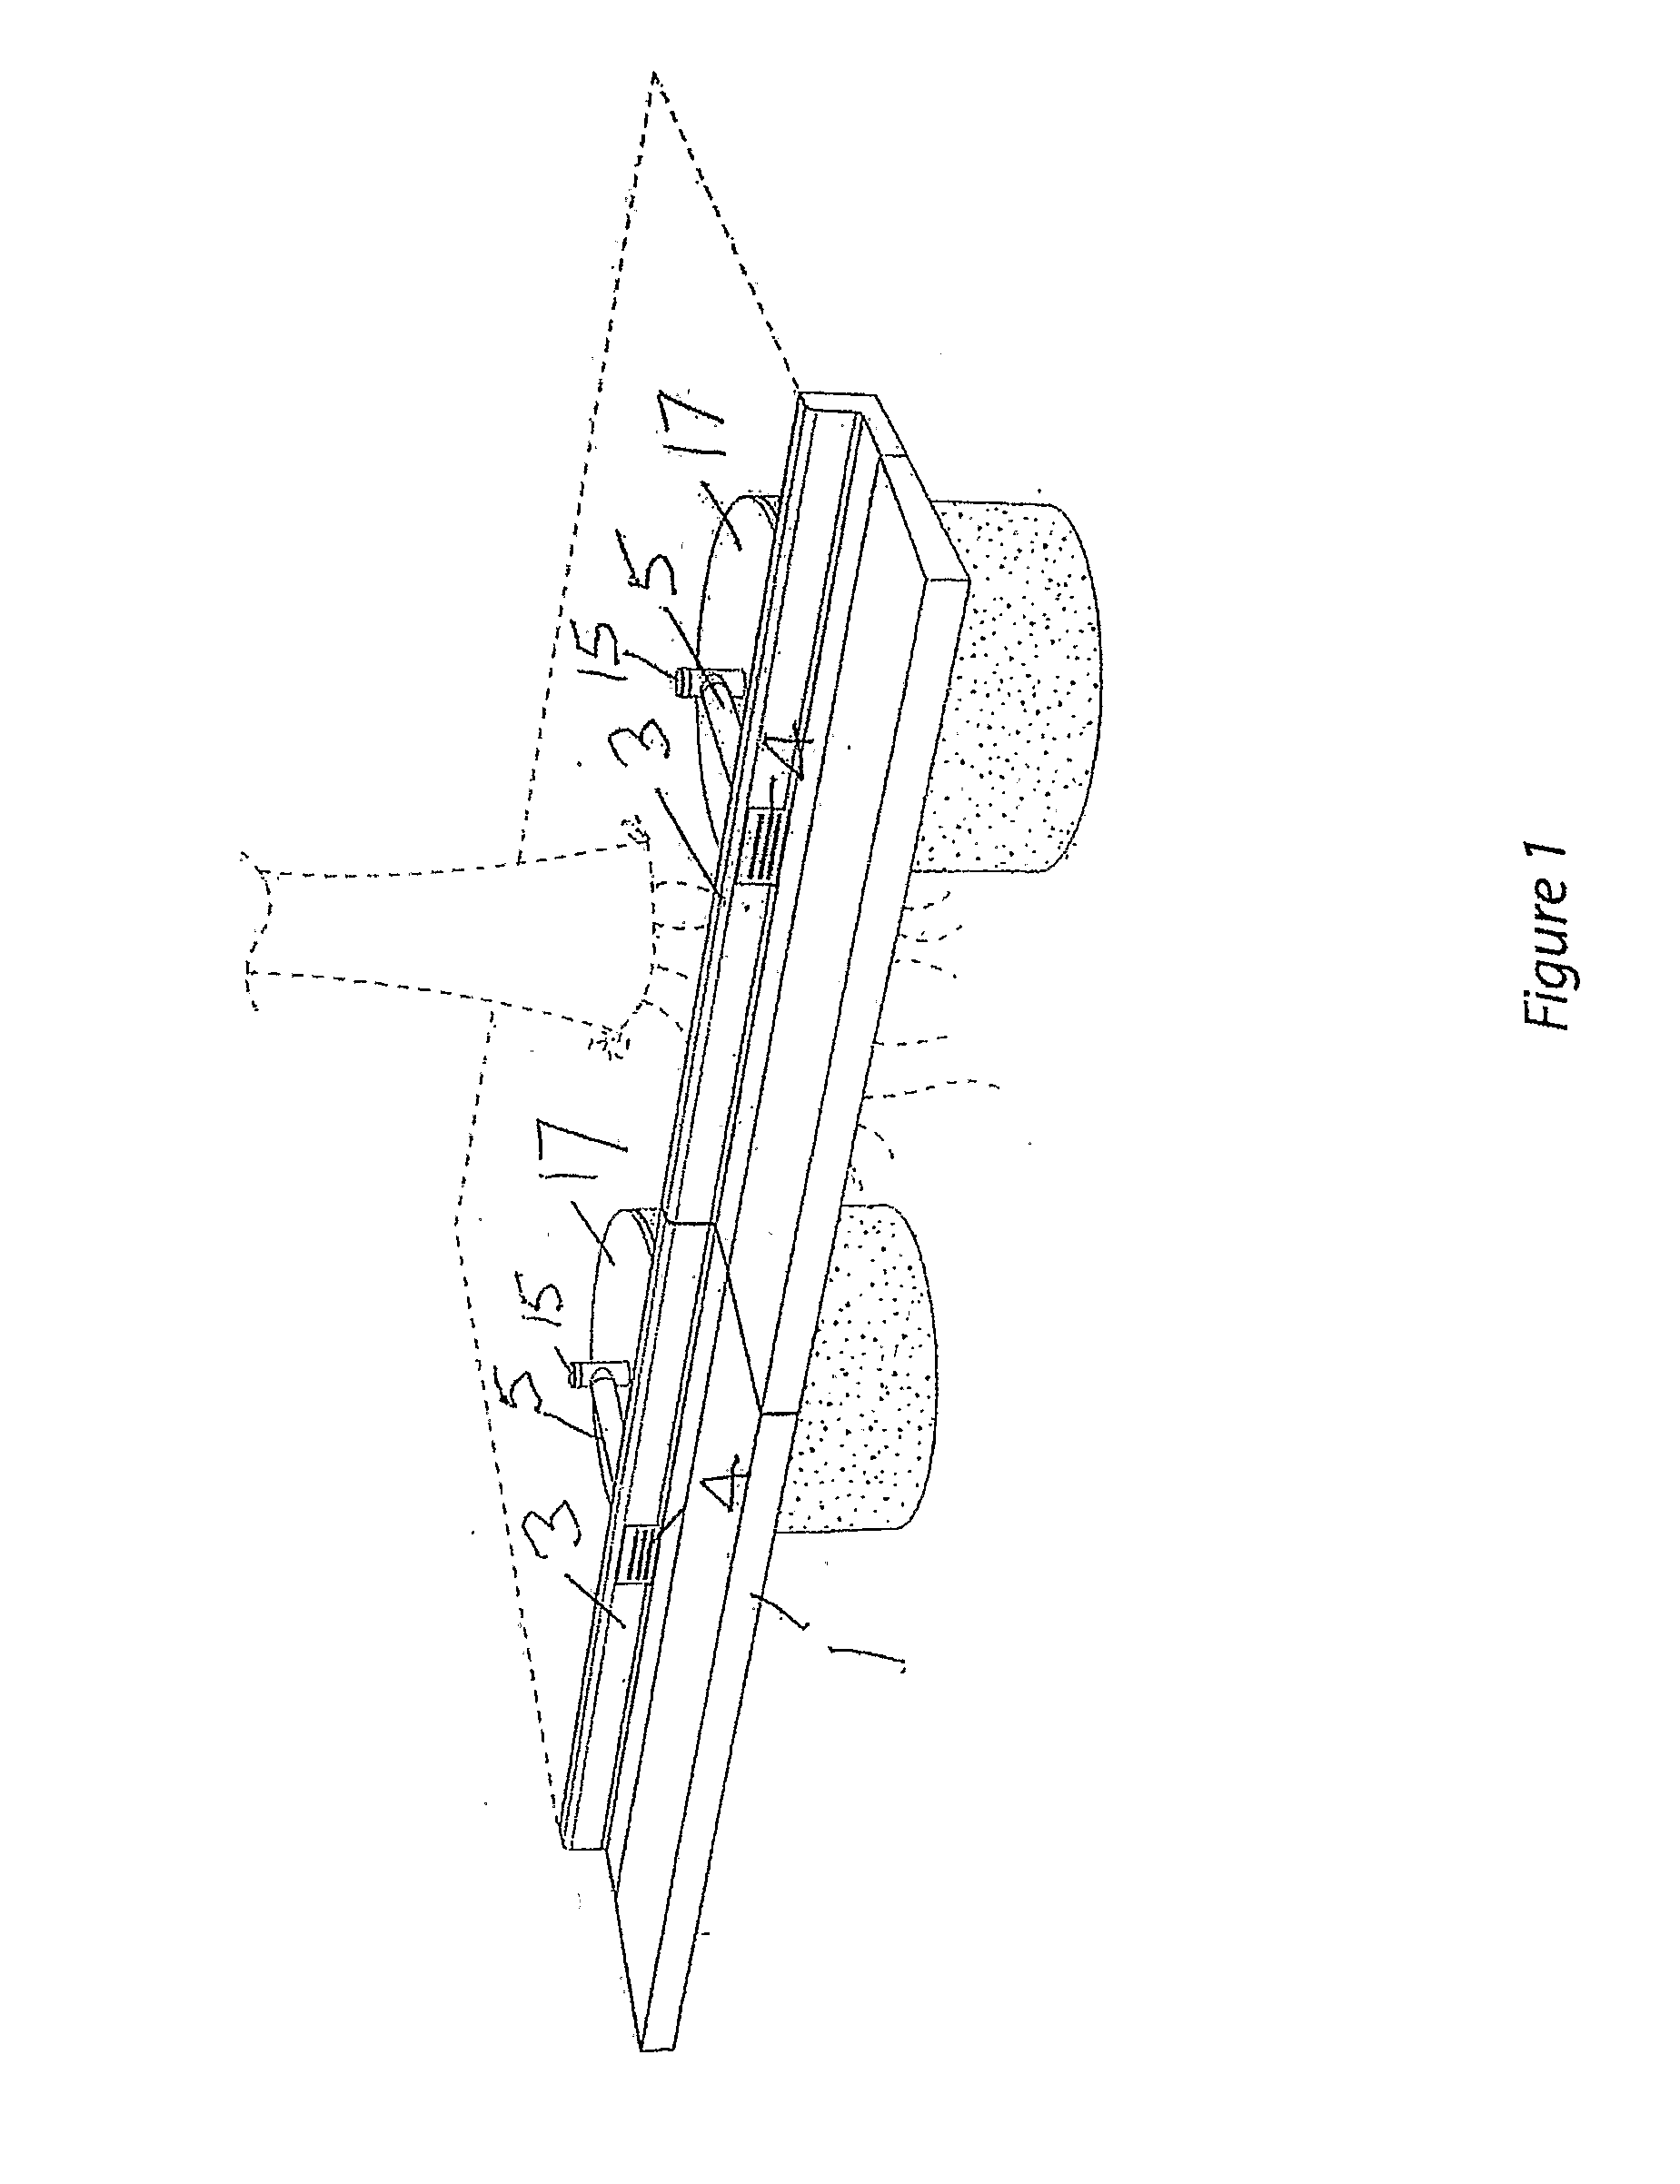 An arrangement and method for facilitating water usage